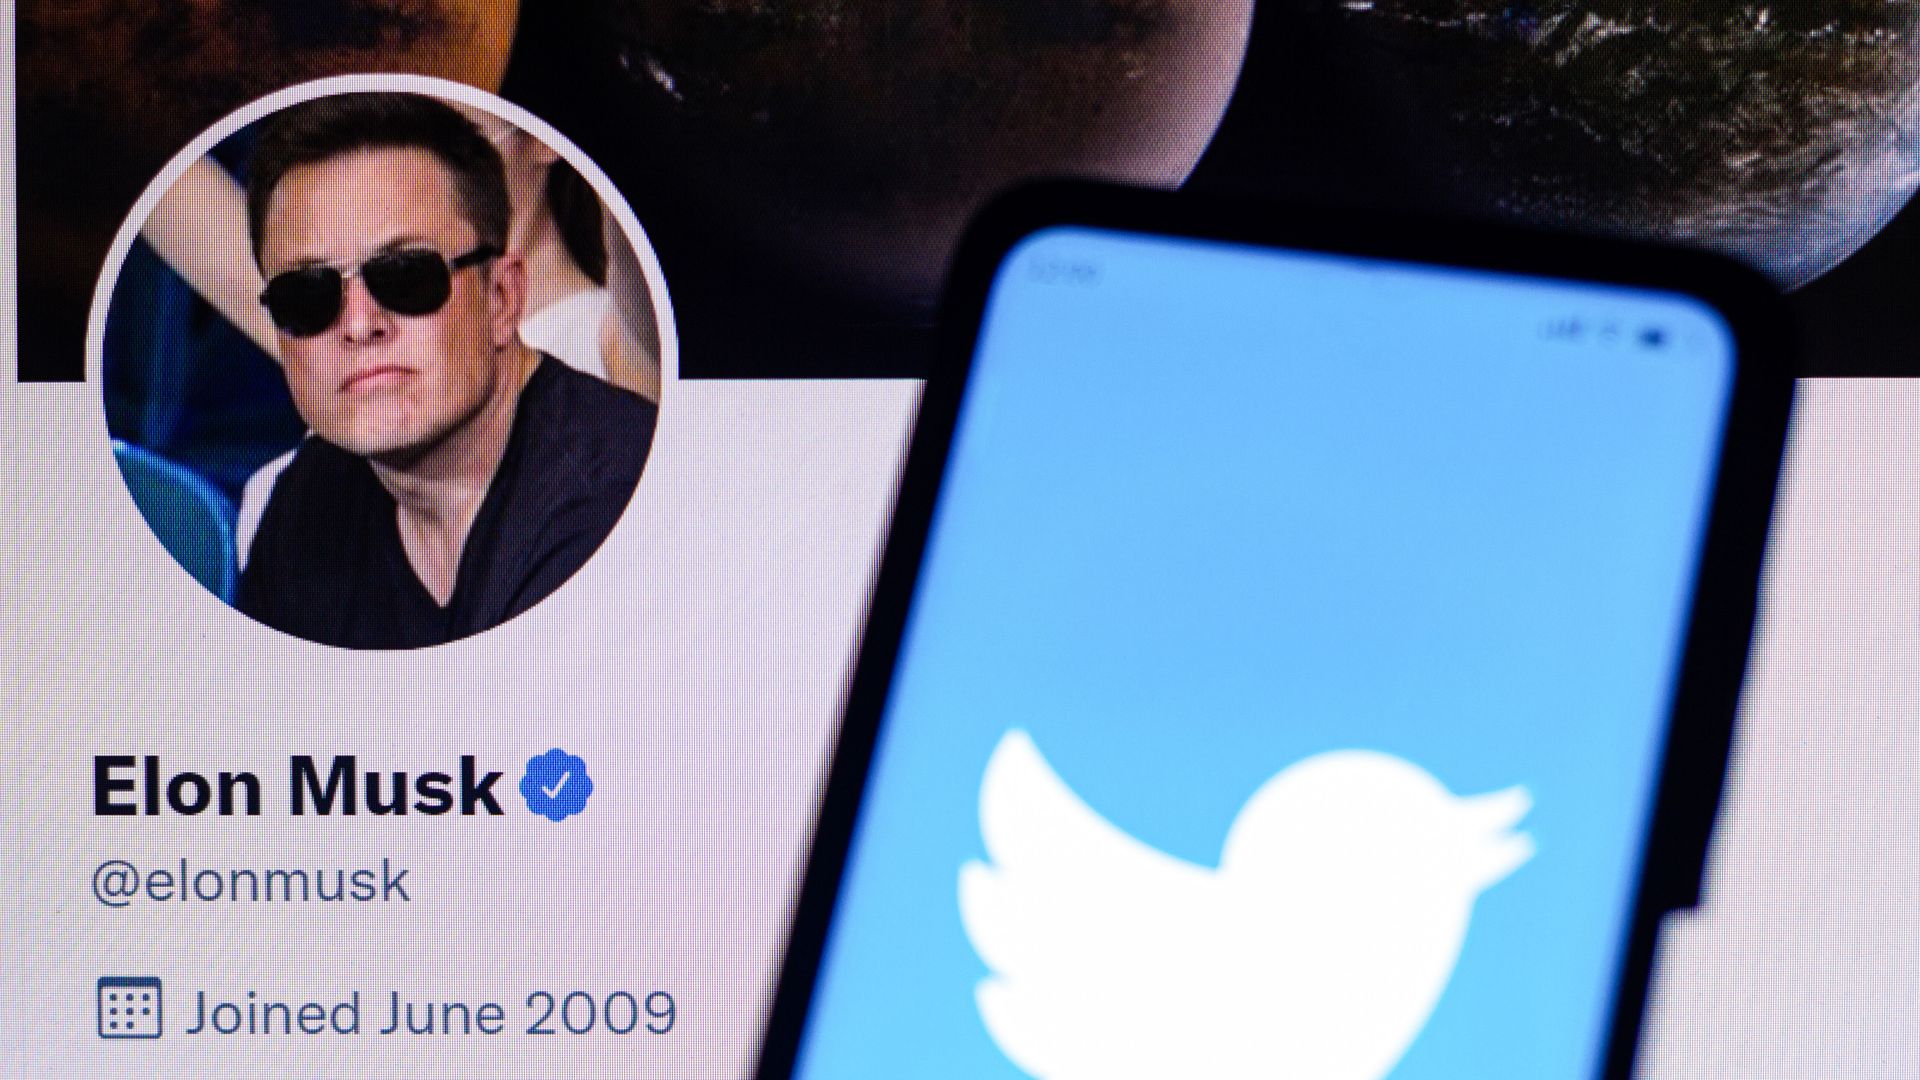 Photo of a computer showing Elon Musk's profile page and a phone showing Twitter's blue logo in front